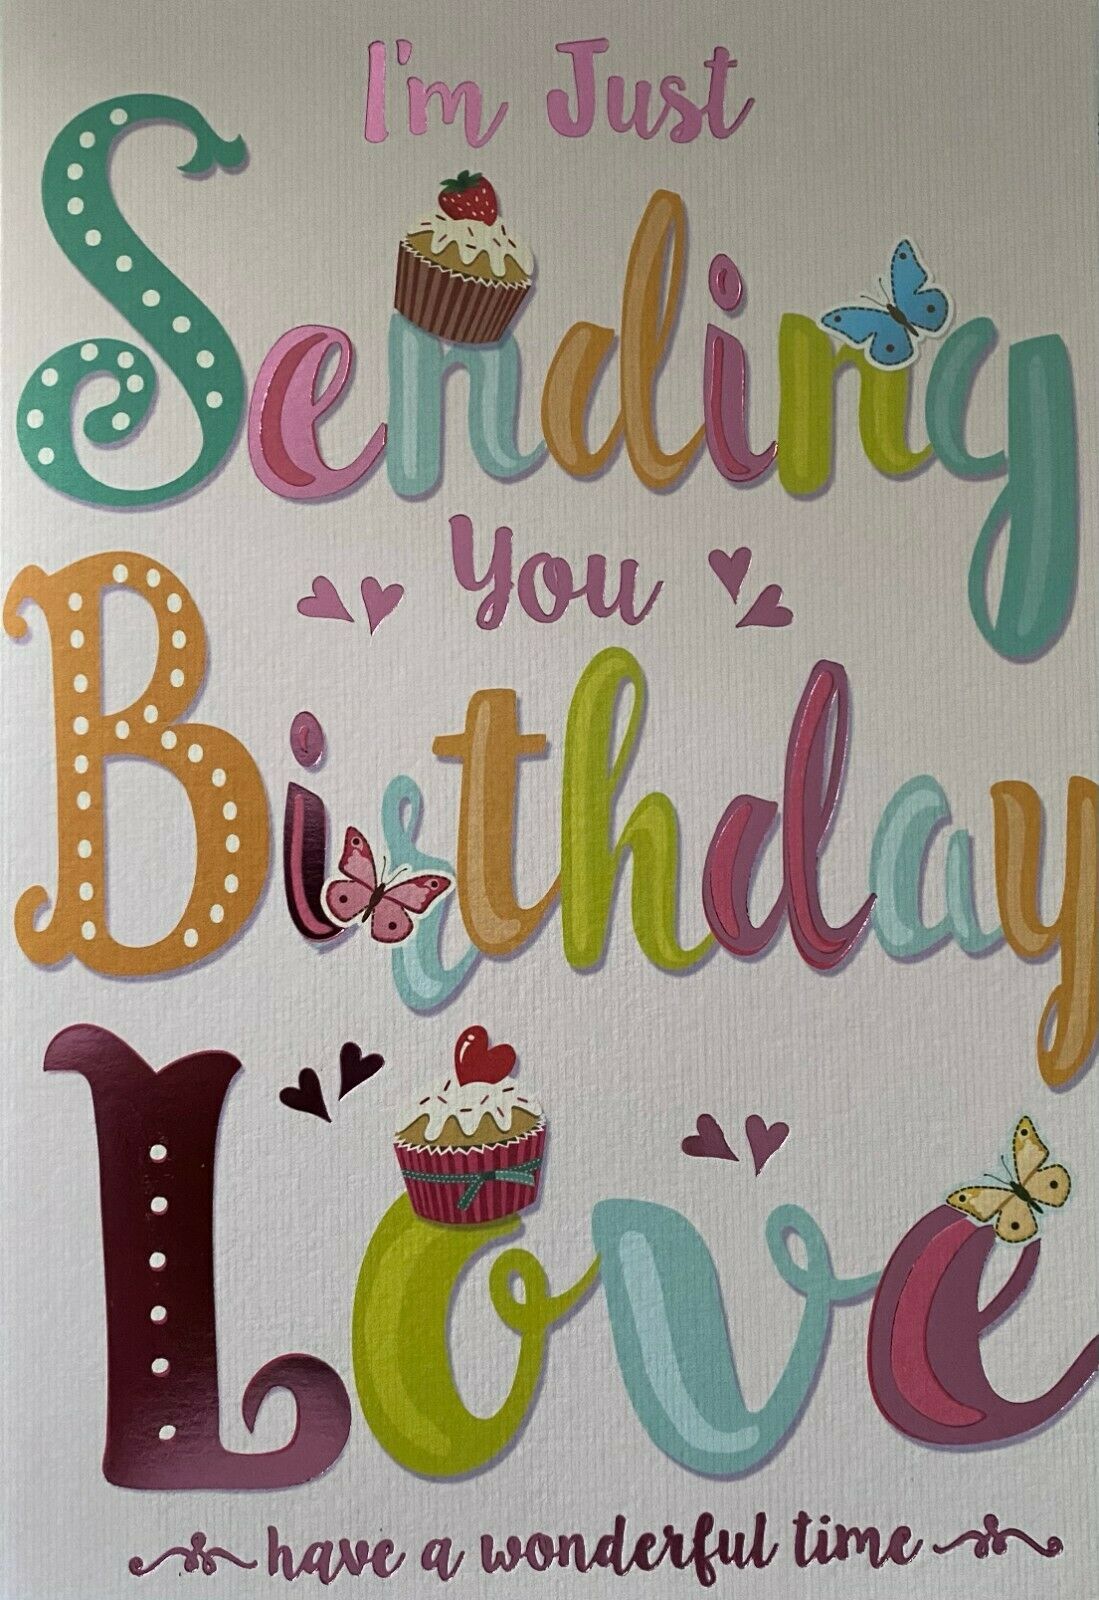 I'm Just Sending You Birthday Love Have A Wonderful Time - Card